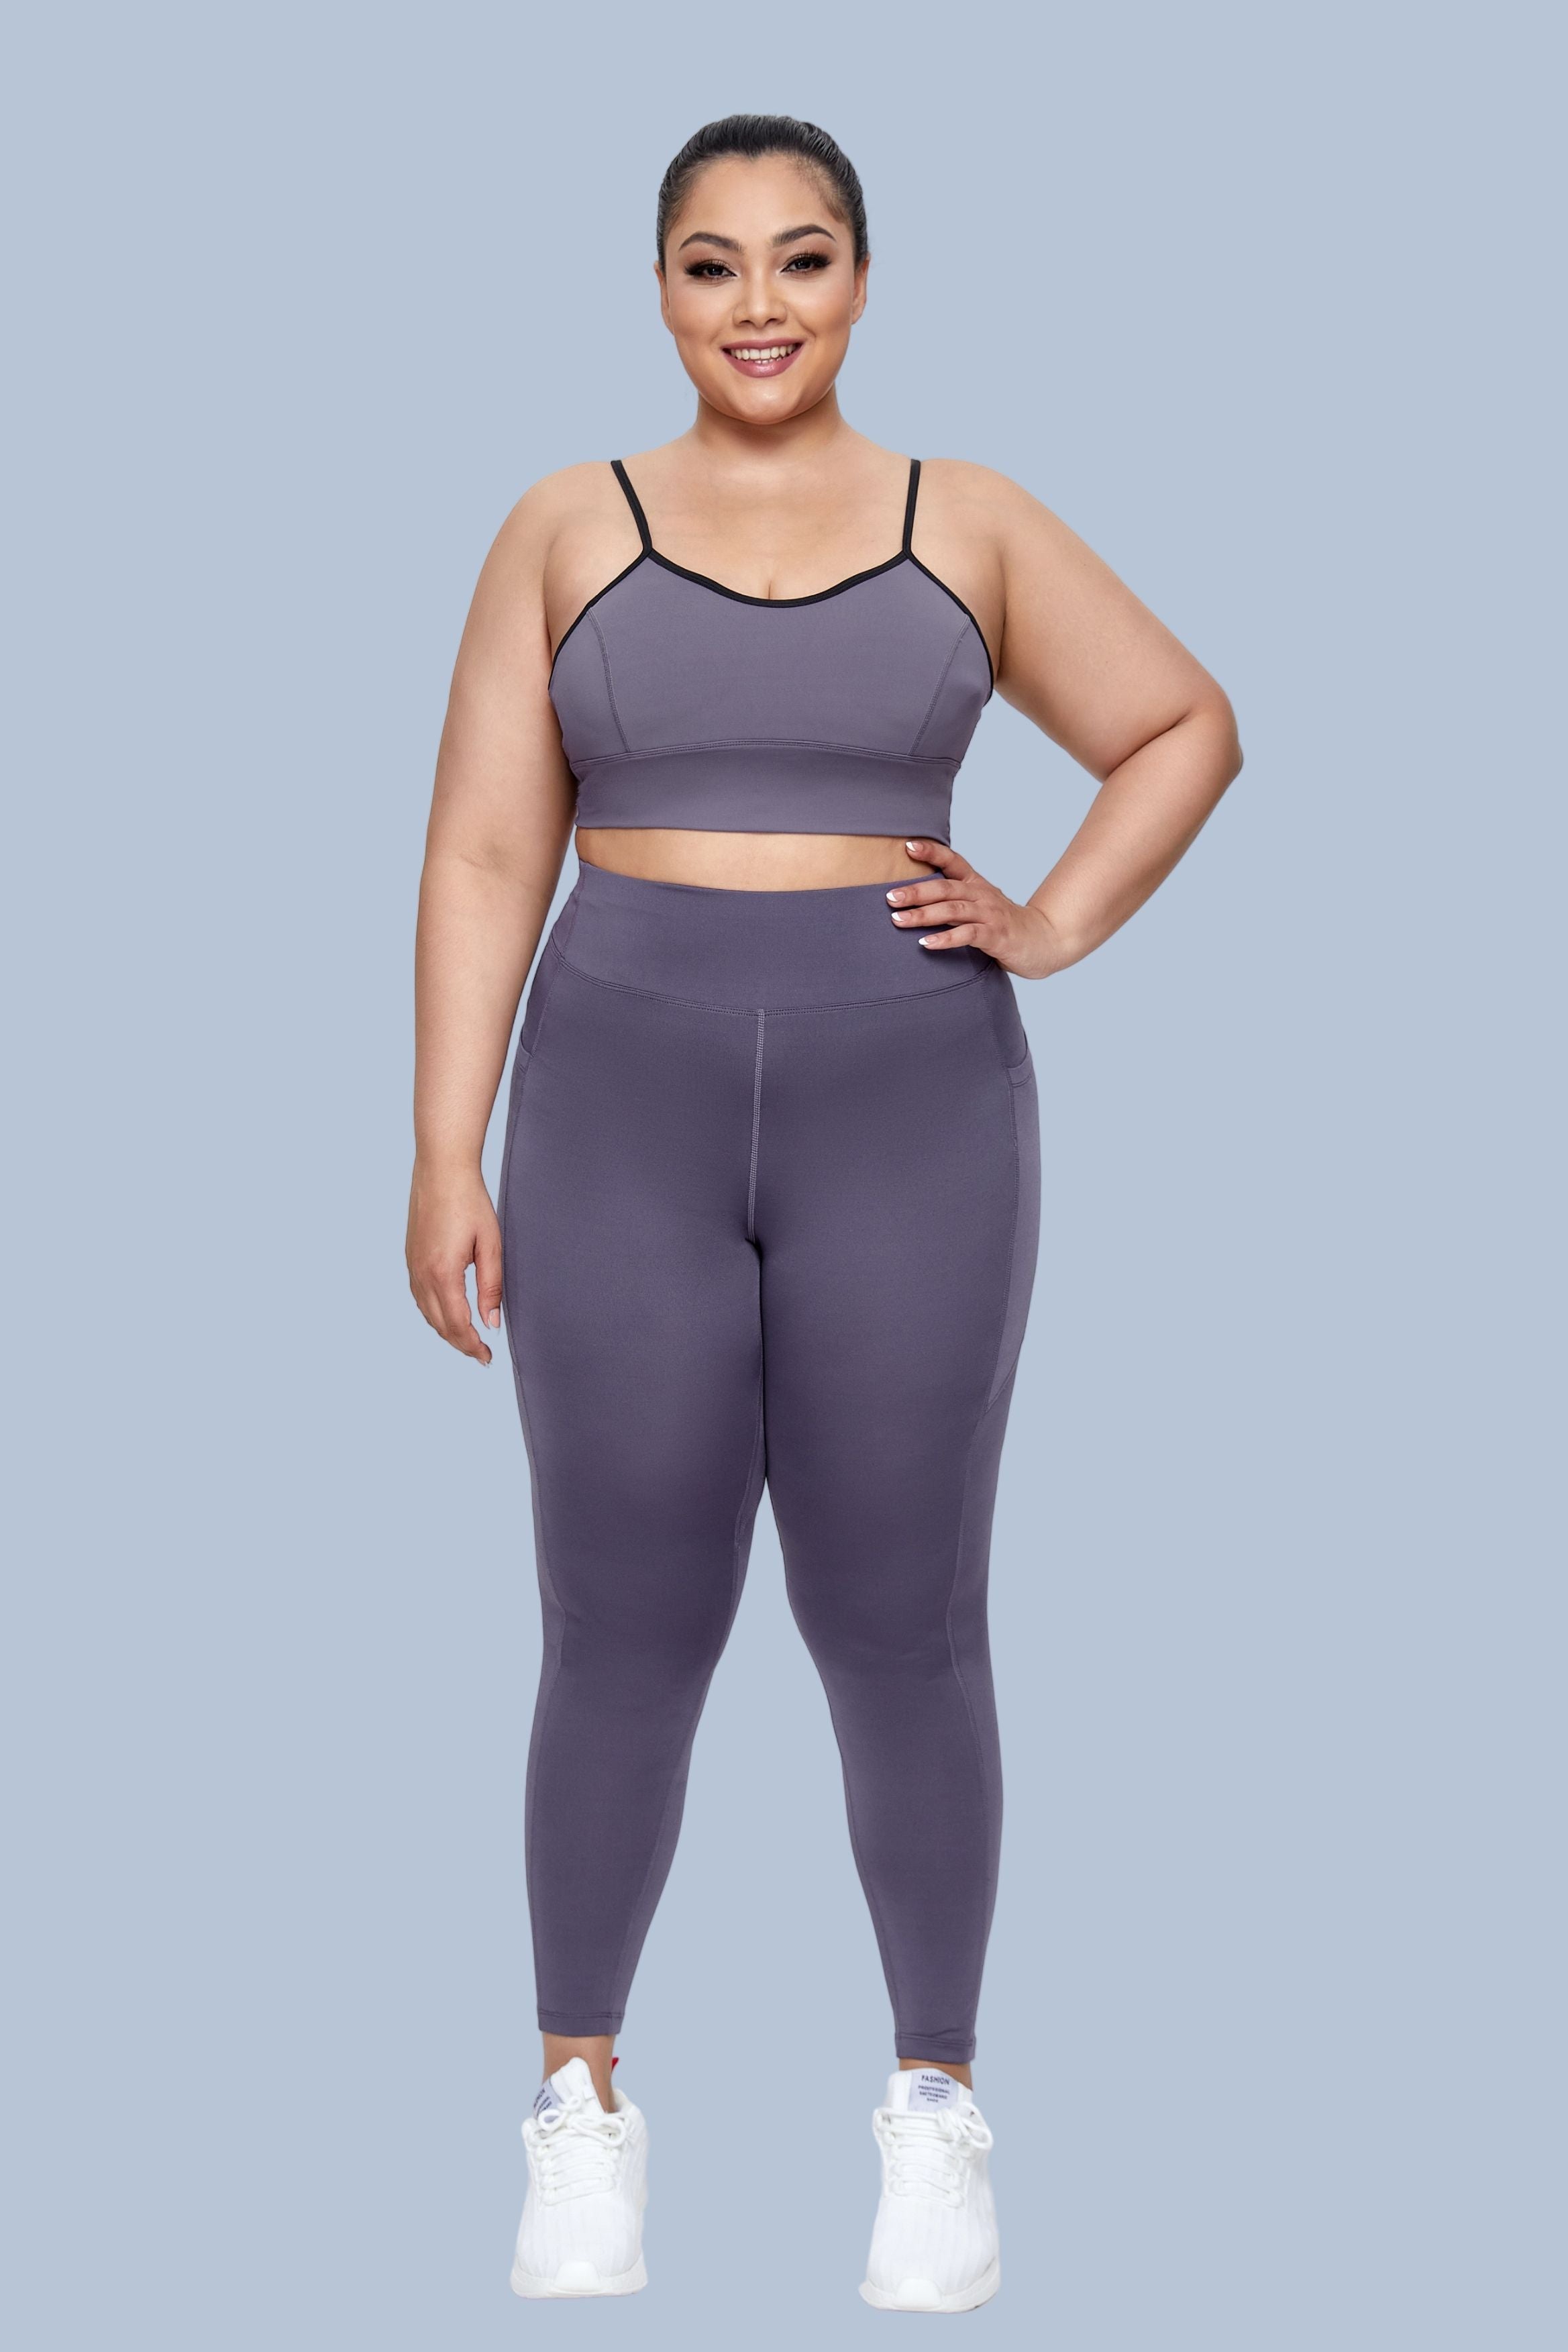 Leggings With Pockets For Plus Size Women